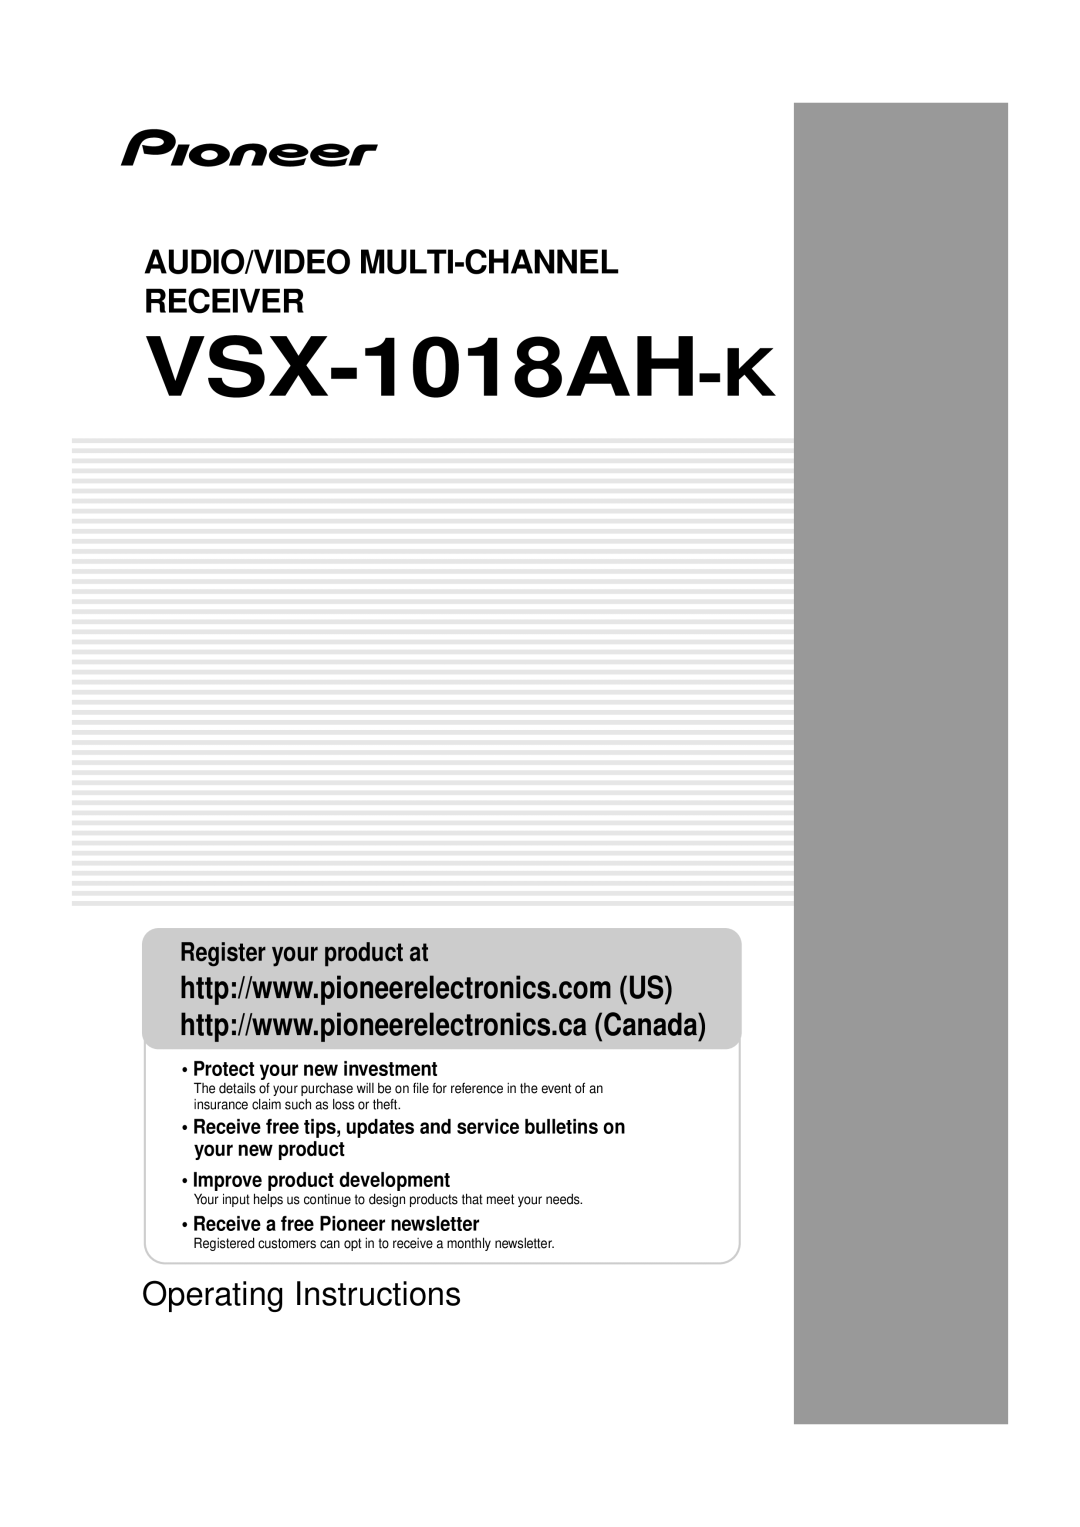 Pioneer VSX-1018AH-K 7 operating instructions Audio/Video Multi-Channelreceiver, Operating Instructions 